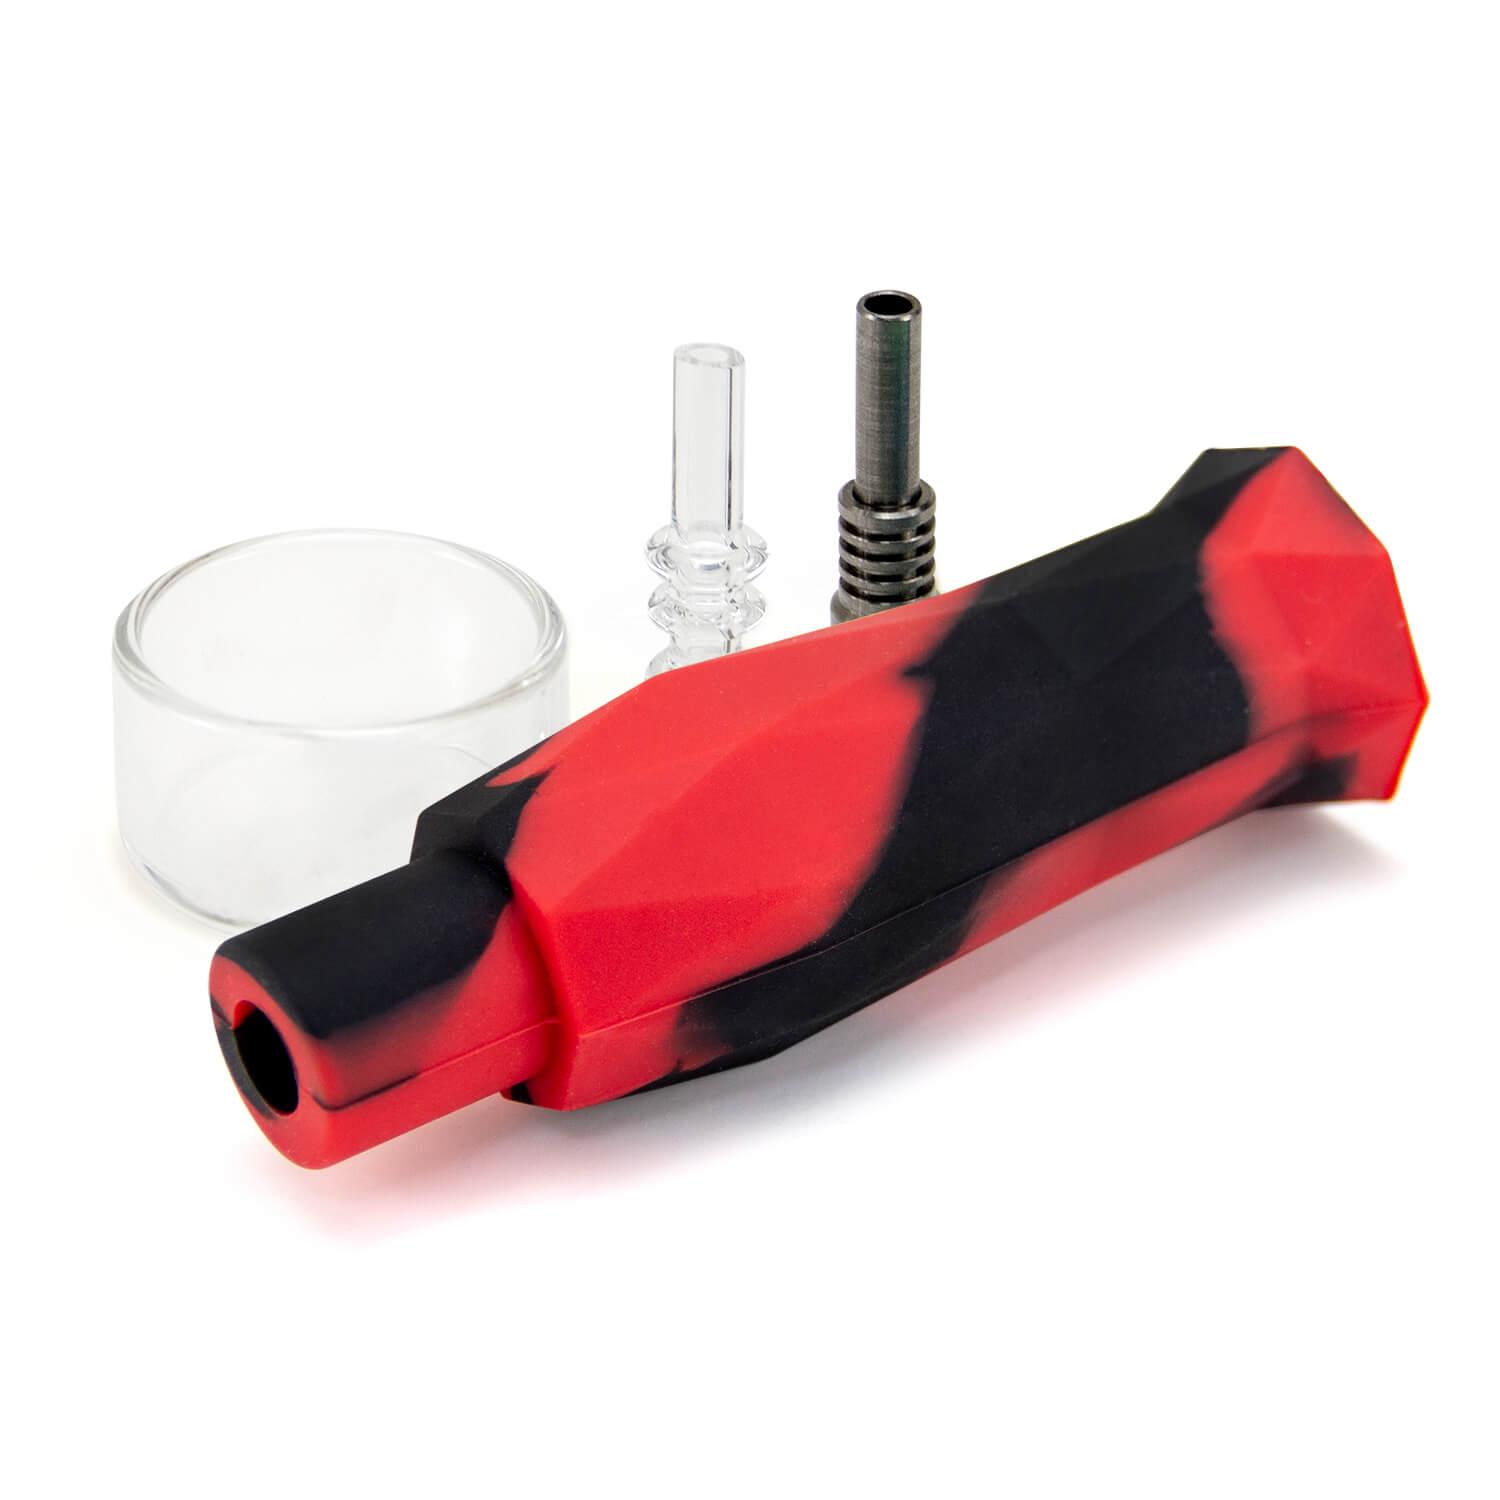 Silicone Nectar Collector Honey Straw kit - PILOT DIARY